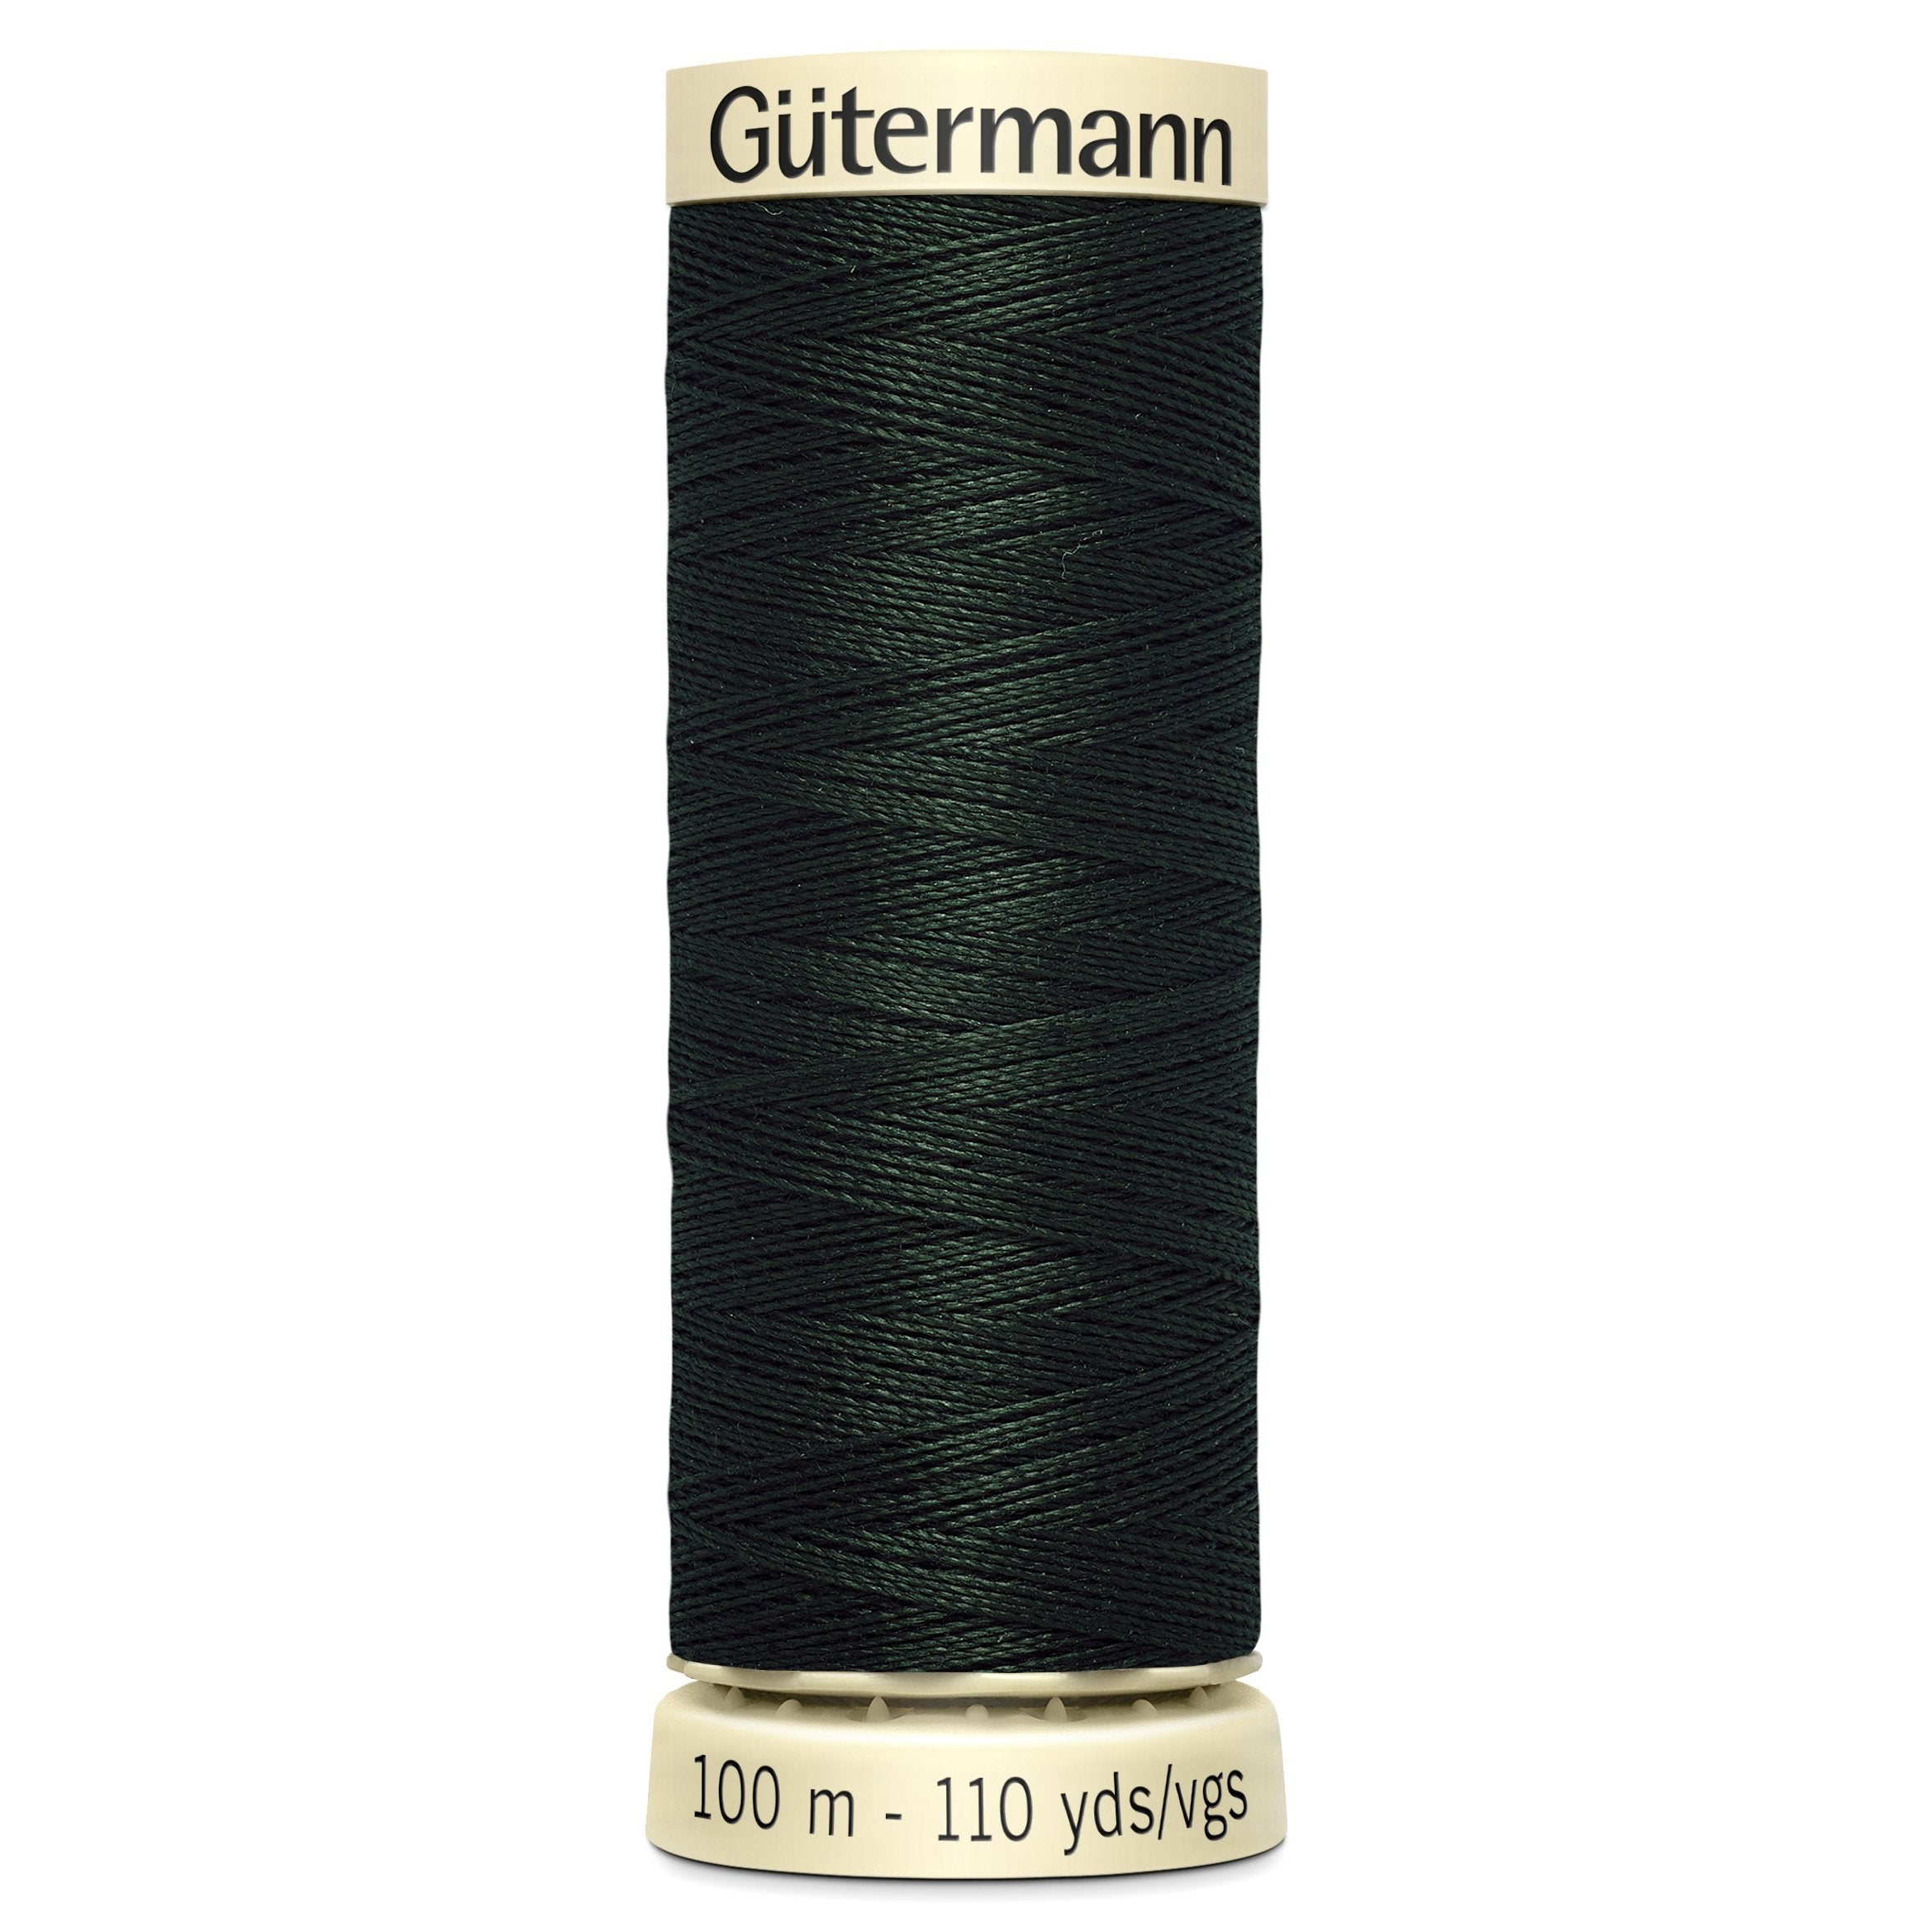 Gutermann Sew All Thread colour 687 Very Dark Green from Jaycotts Sewing Supplies